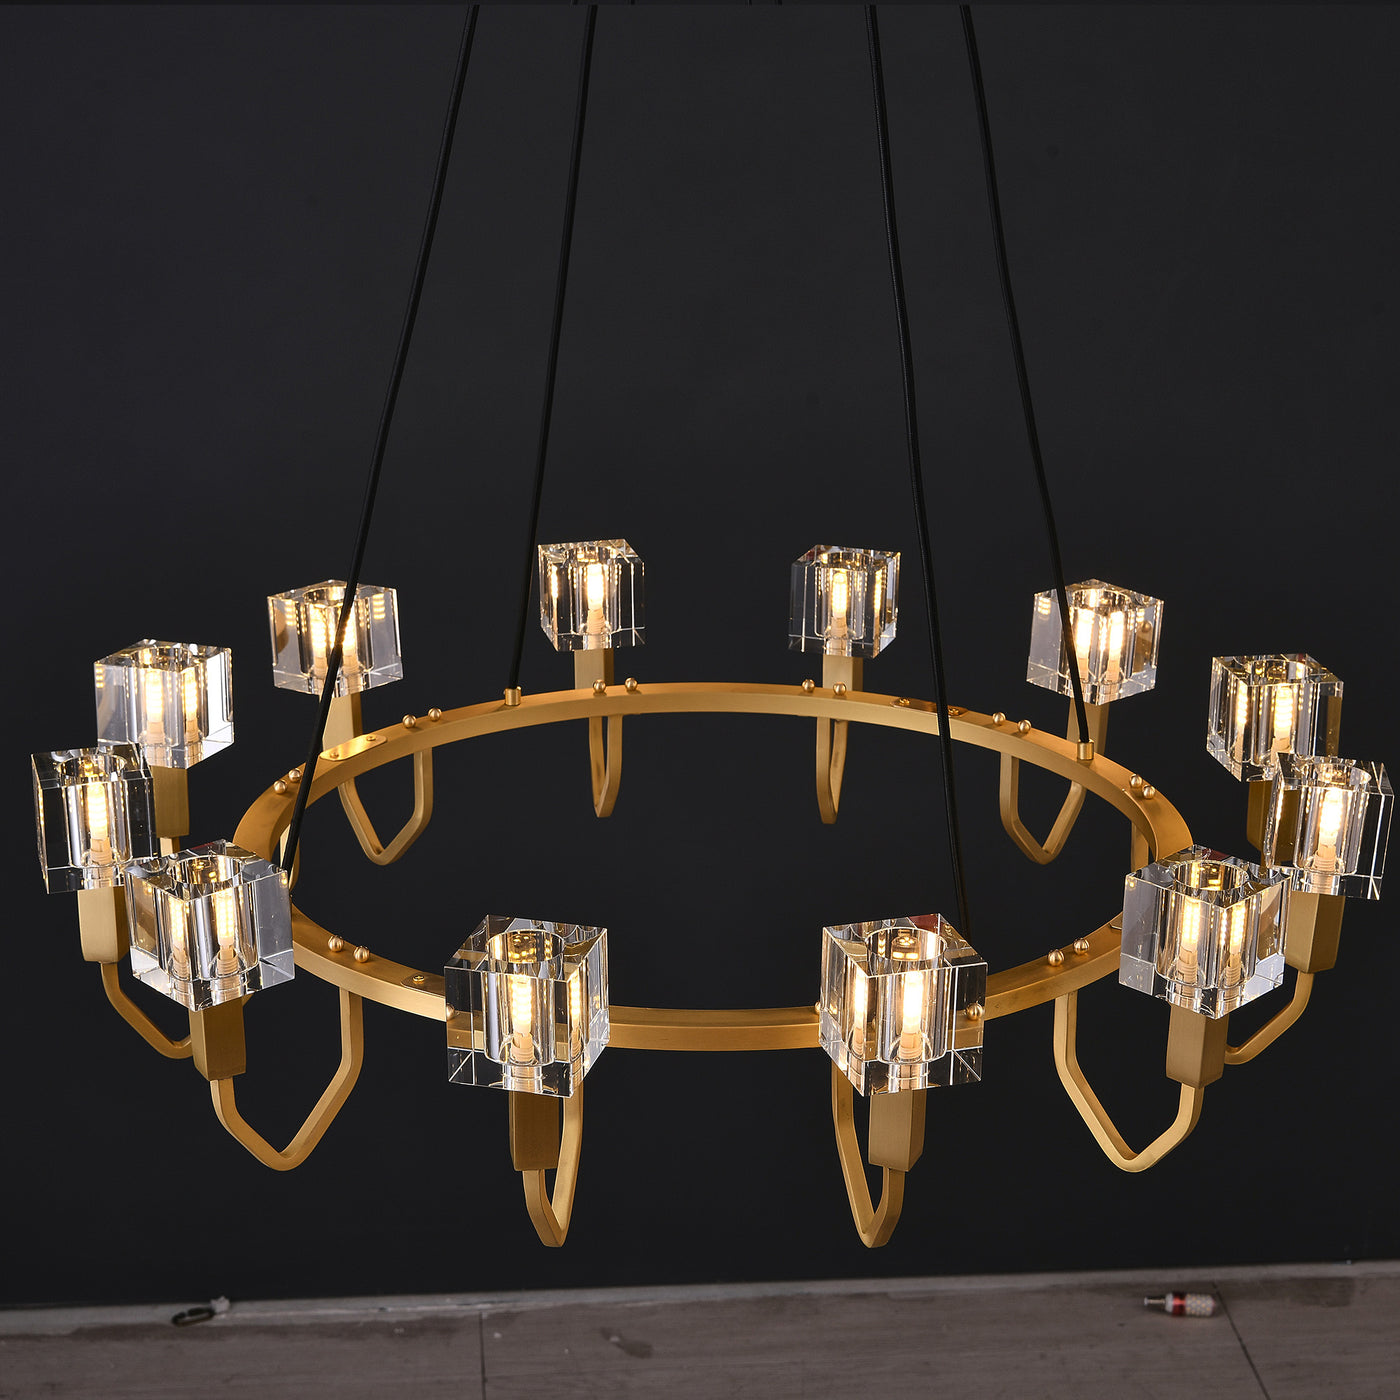 12 Light Round Cube Crystal Chandelier